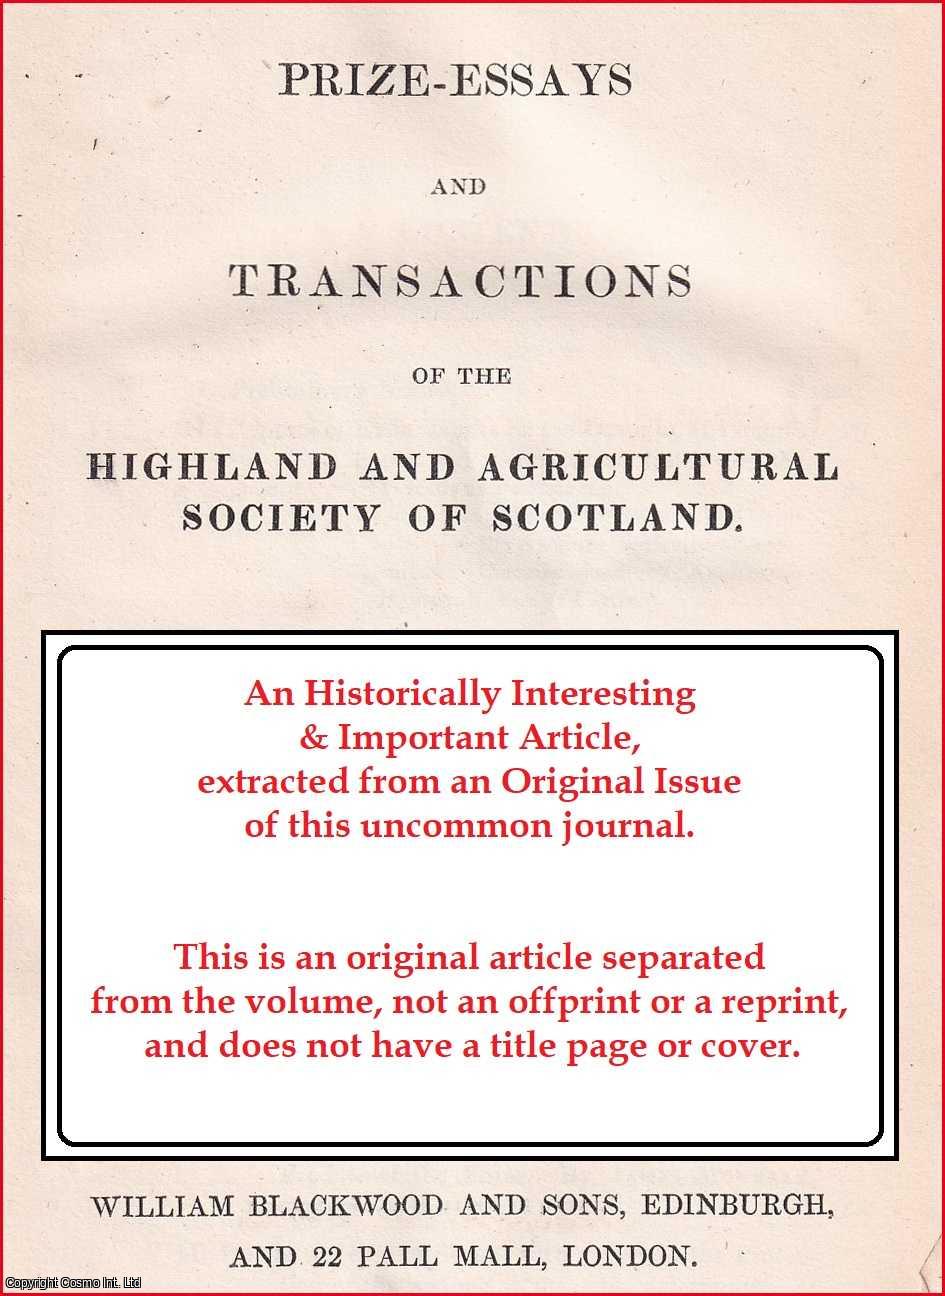 G. Campbell Smith, Esq. of Corryborough, Landsurveyor, Banffshire. - An Experiment in Top-Dressing with Bones & Lime. An uncommon original article from the Prize Essays and Transactions of the Highland Society of Scotland, 1843.